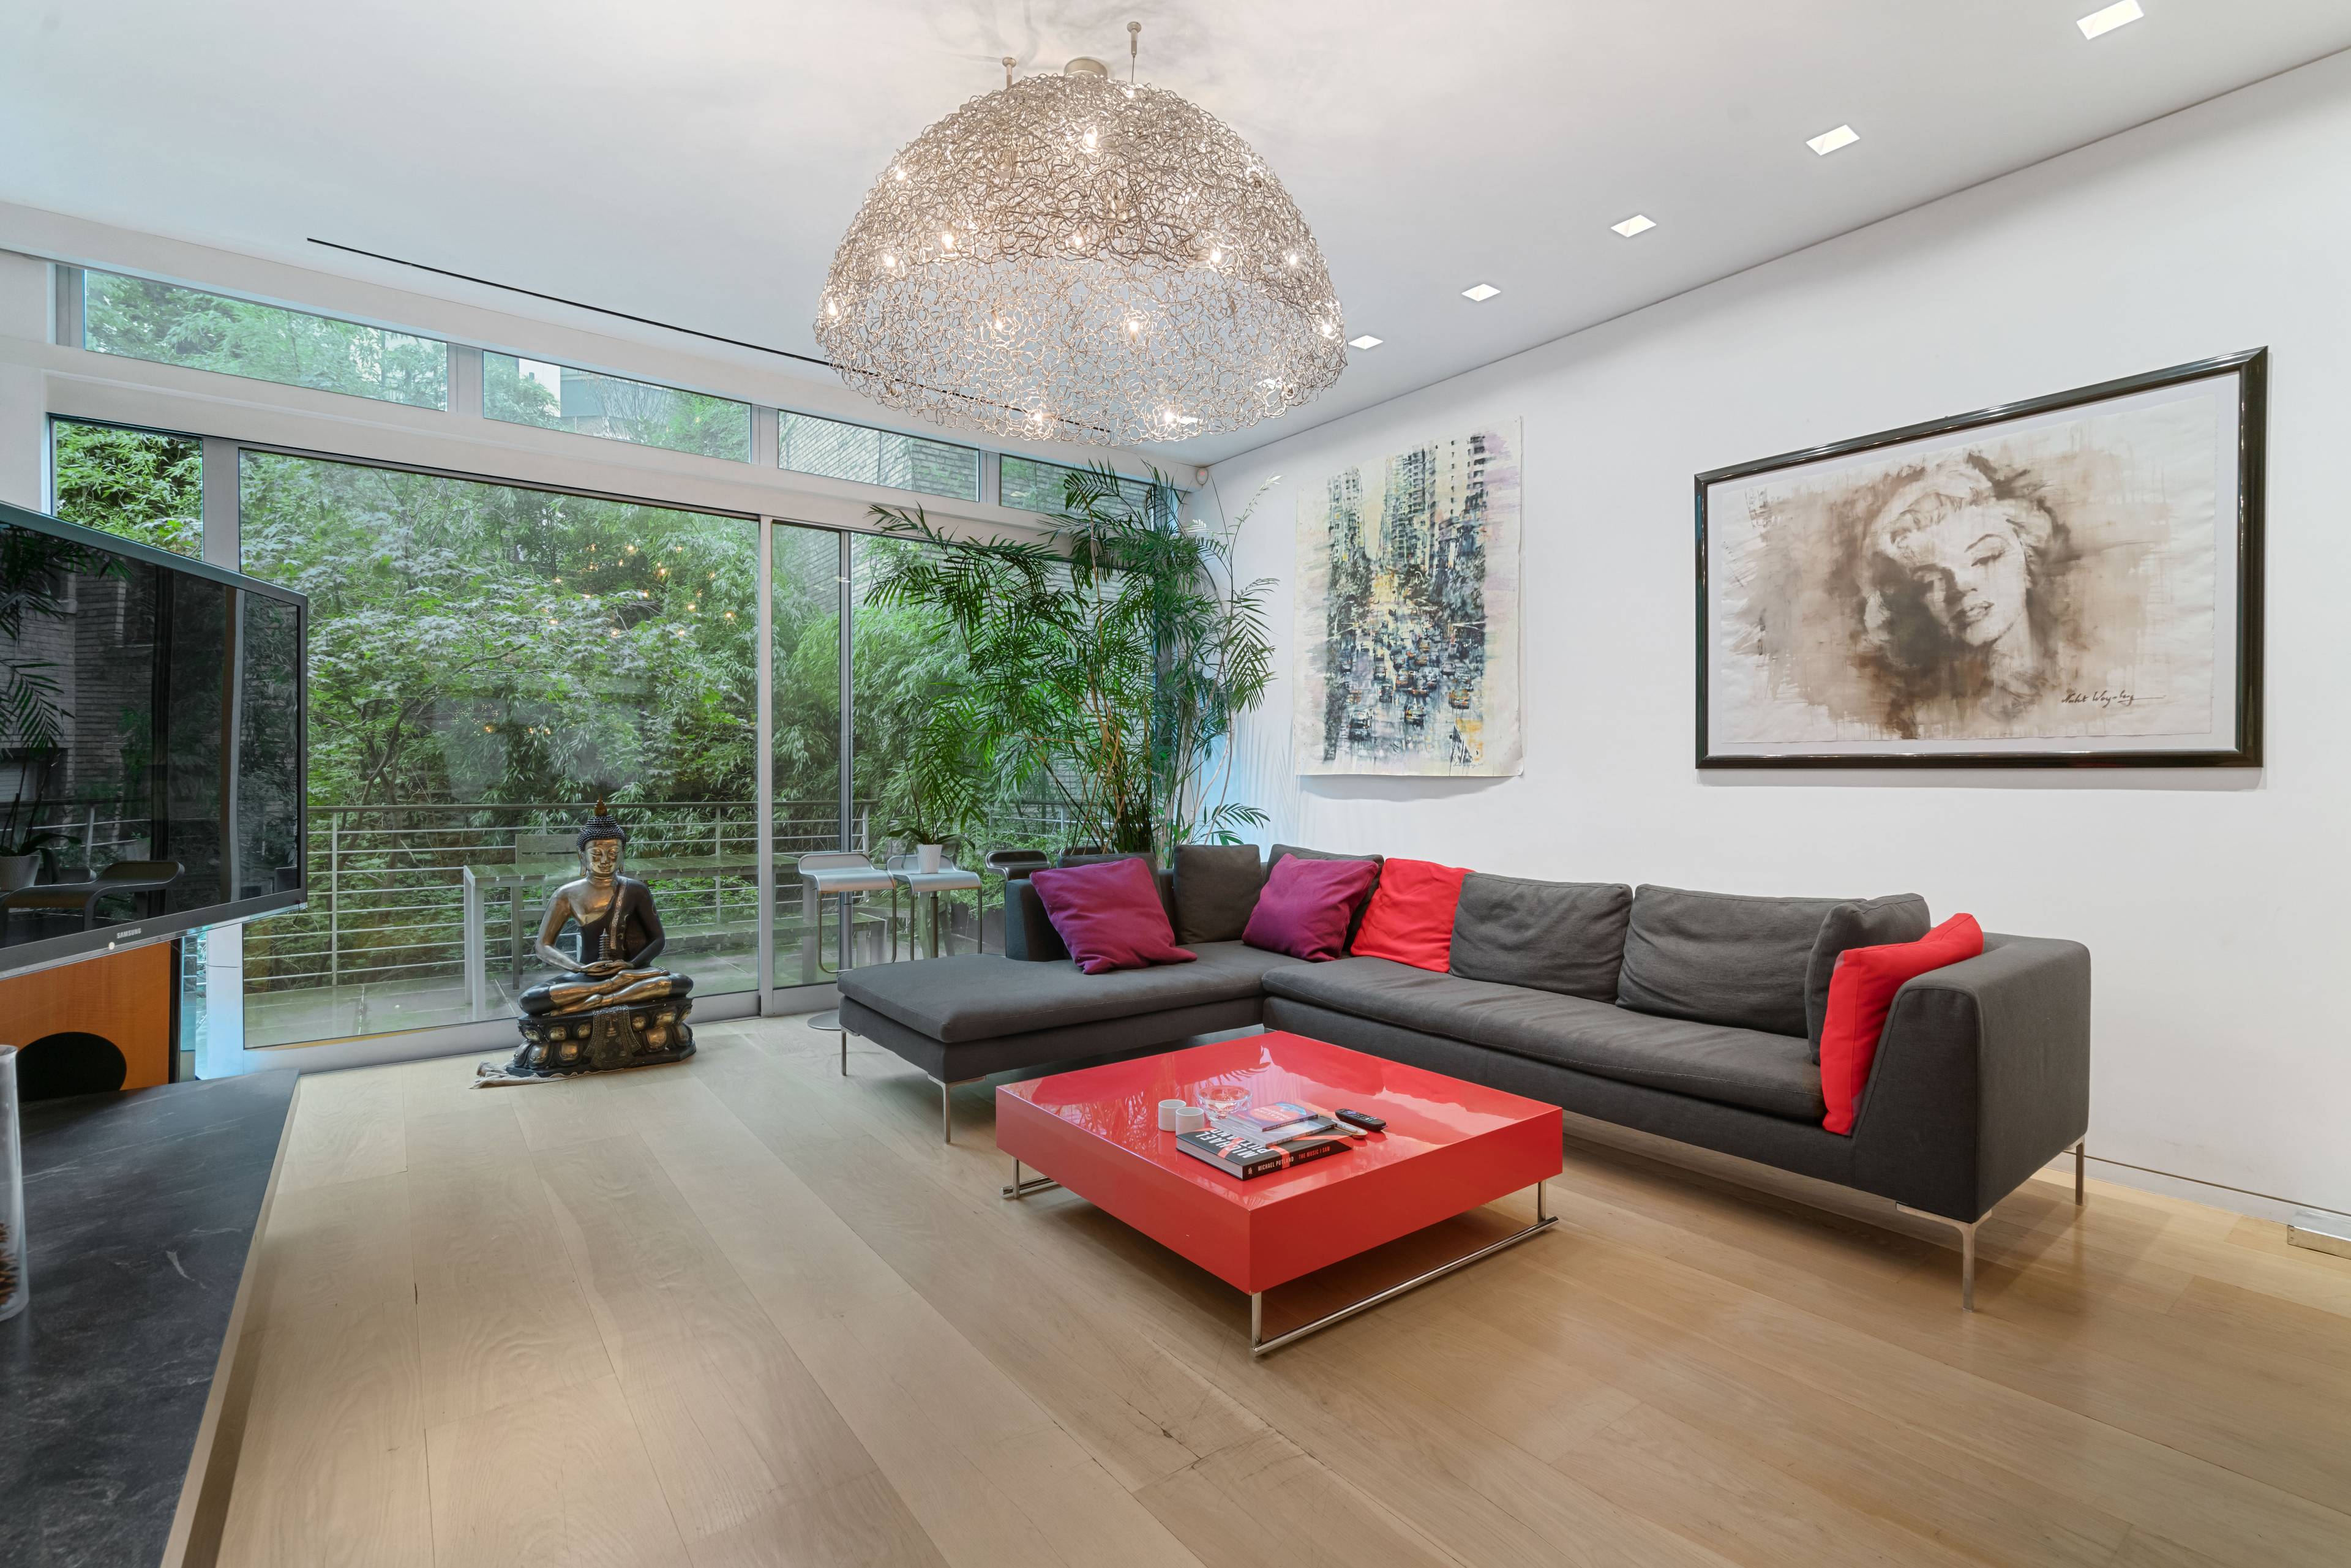 7000 Sqft Stunning Upper East Side Townhome with Private Roof Deck and Backyard